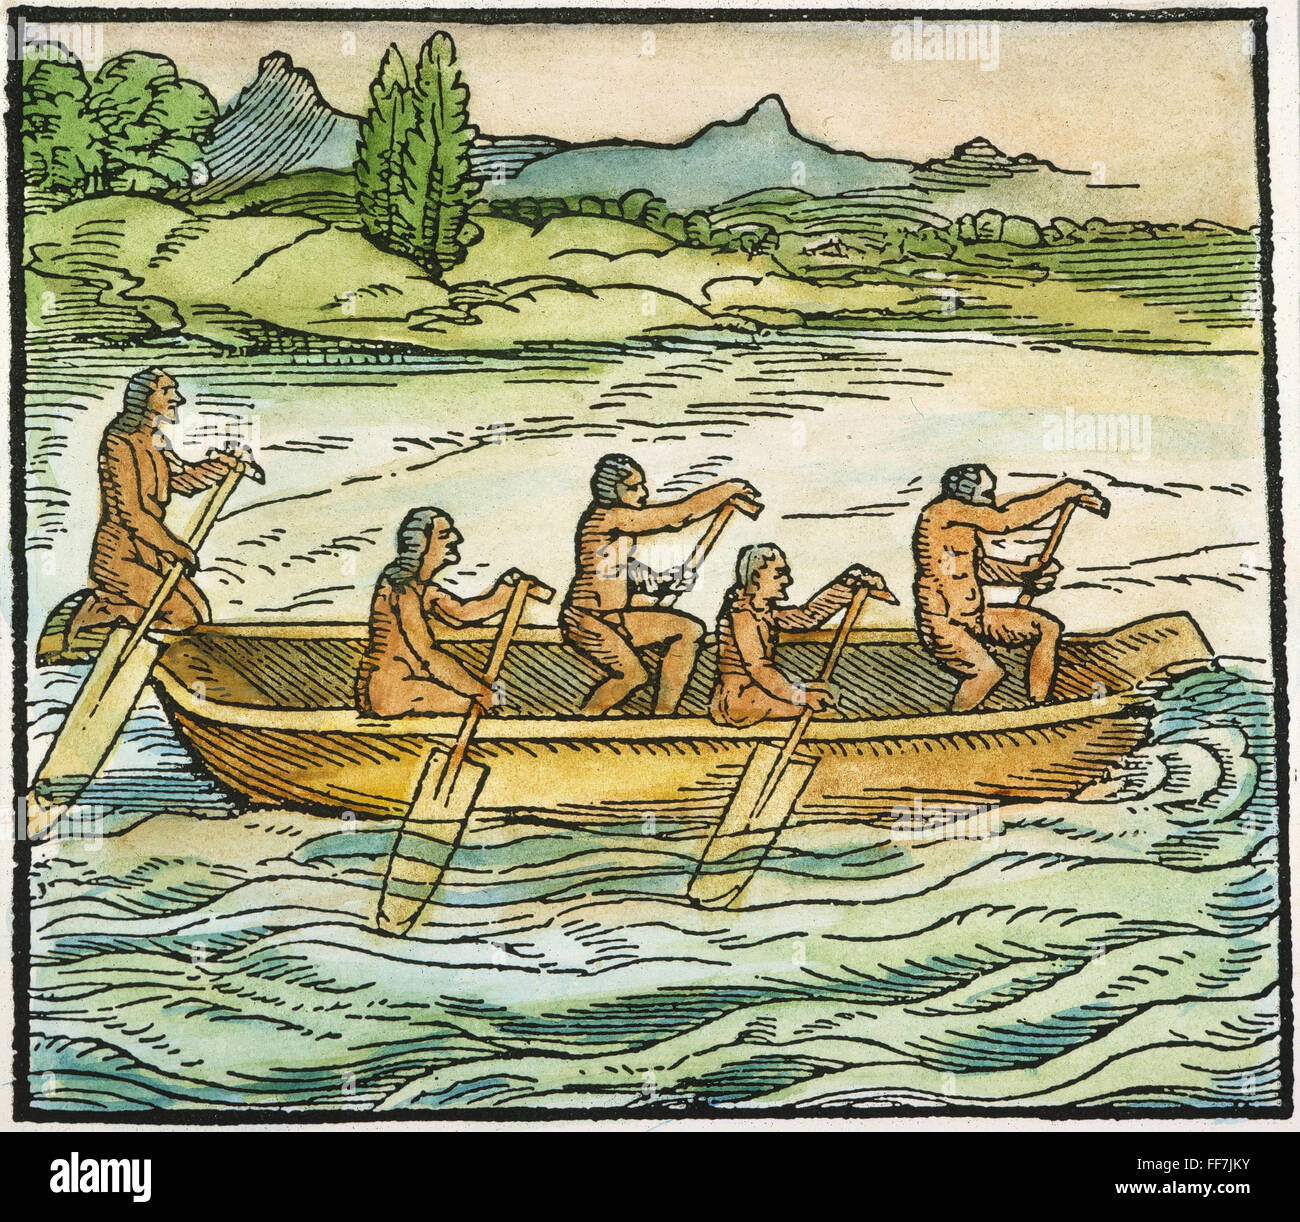 DUGOUT CANOE, 1563. /nNative Indians of the New World paddling a dugout canoe. Color woodcut from Girolamo Benzoni's 'Historia del Mondo Nuovo,' 1563. Stock Photo